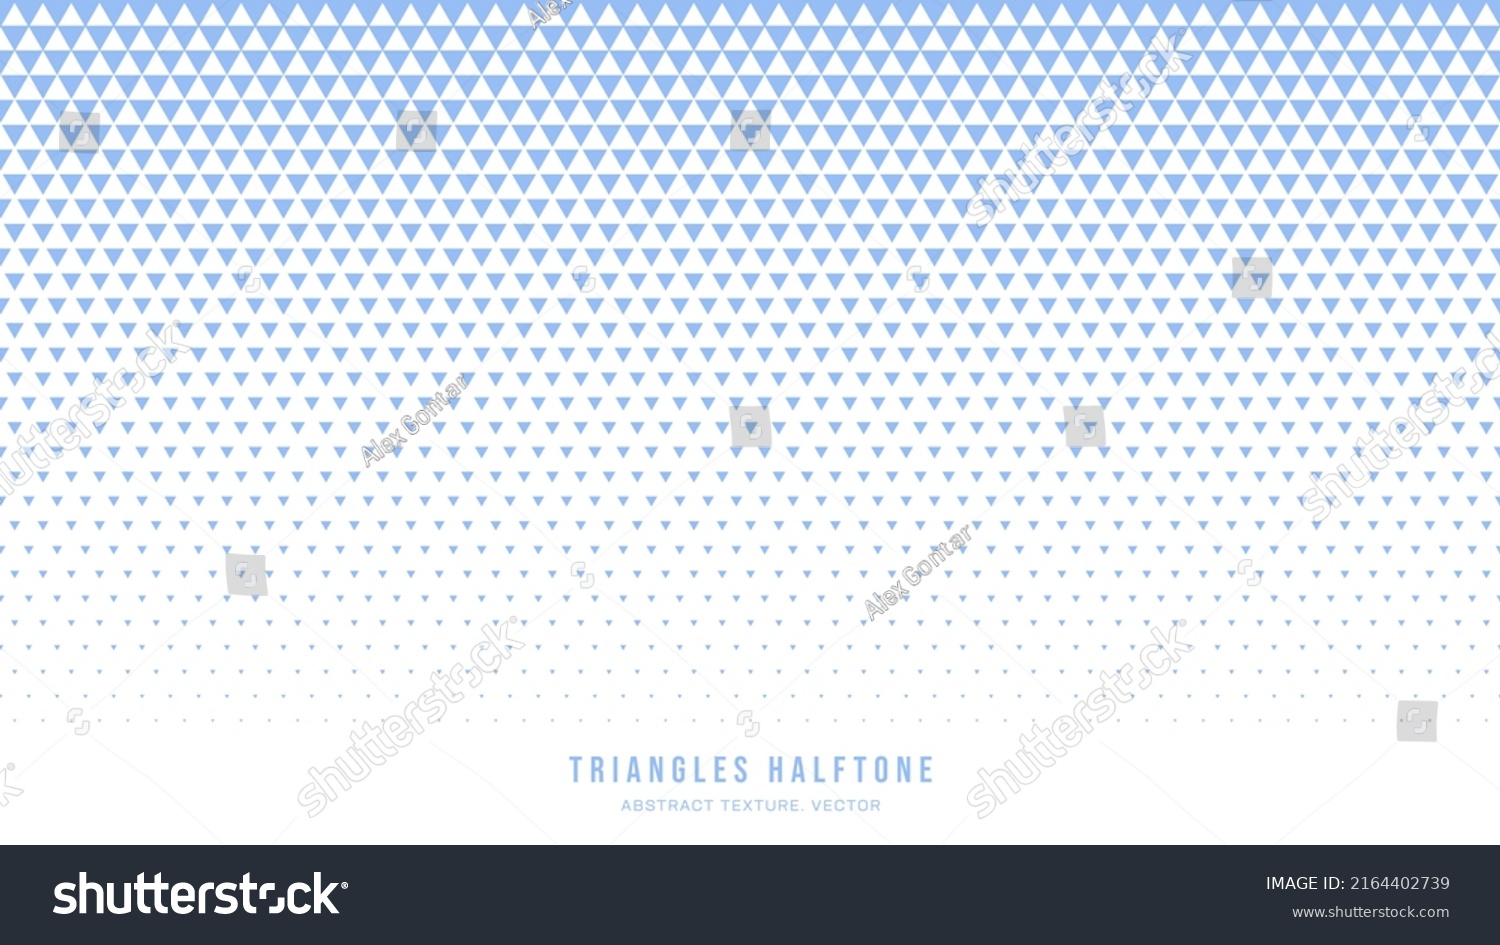 SVG of Triangles Halftone Geometric Pattern Vector Border White Blue Abstract Background. Faded Chequered Falling Triangle Particles Subtle Texture. Half Tone Art Graphic Minimalist Pure Light Wide Wallpaper svg